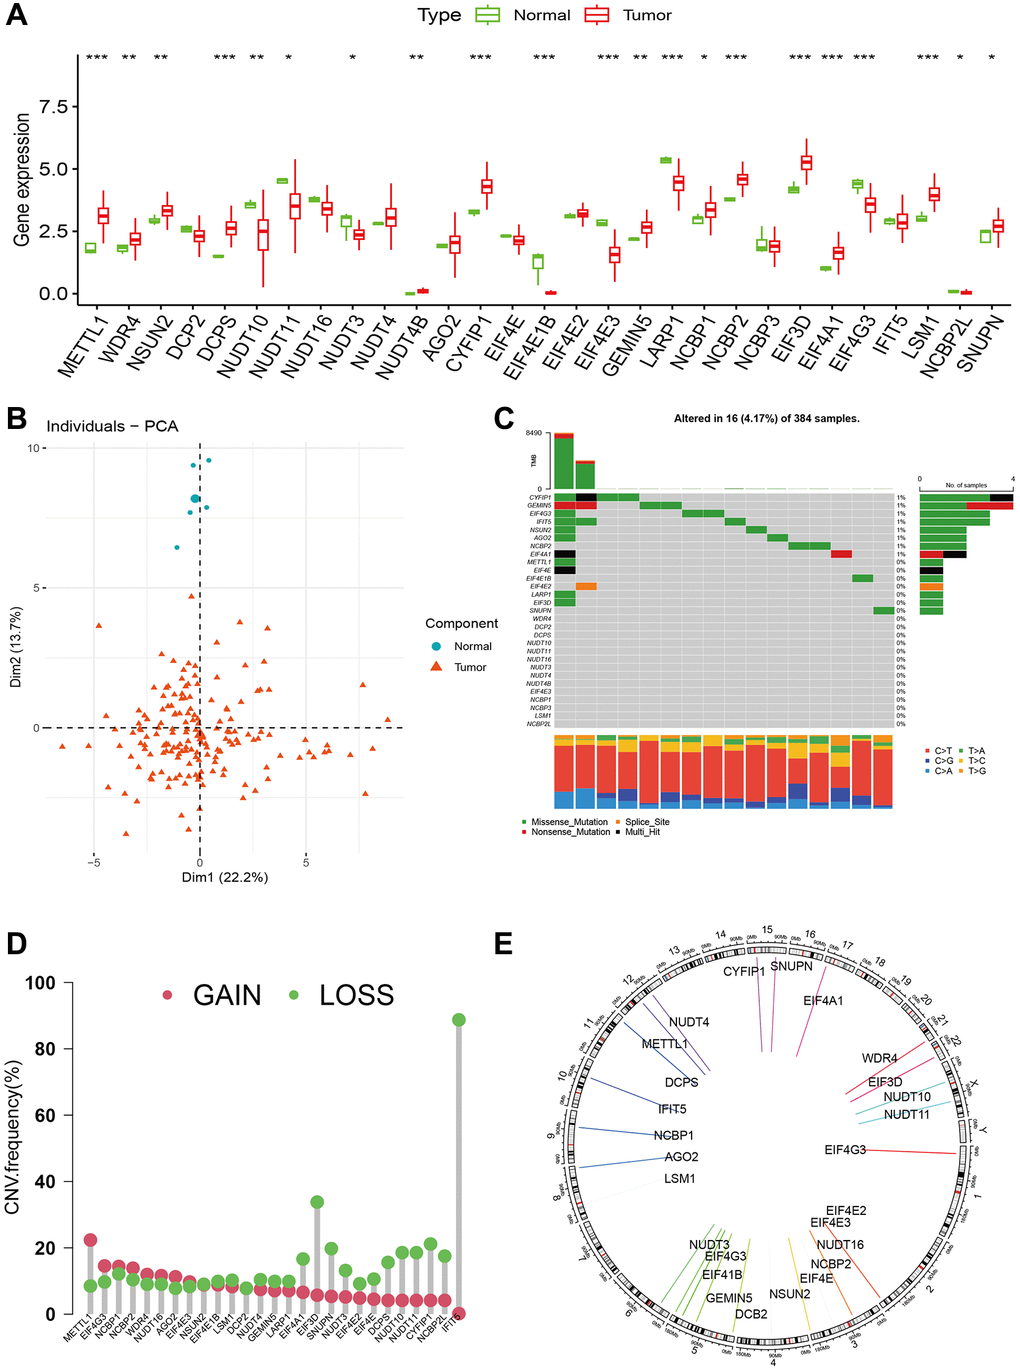 The landscape of m7G regulators in glioma. (A) Expression levels of m7G regulators between tumor and normal samples. (B) PCA of m7G regulators between tumor and normal samples. (C) The gene alterations of m7G regulators in advanced glioma. (D, E) Copy number variation frequencies and chromosomal location of m7G regulators in high-grade glioma.